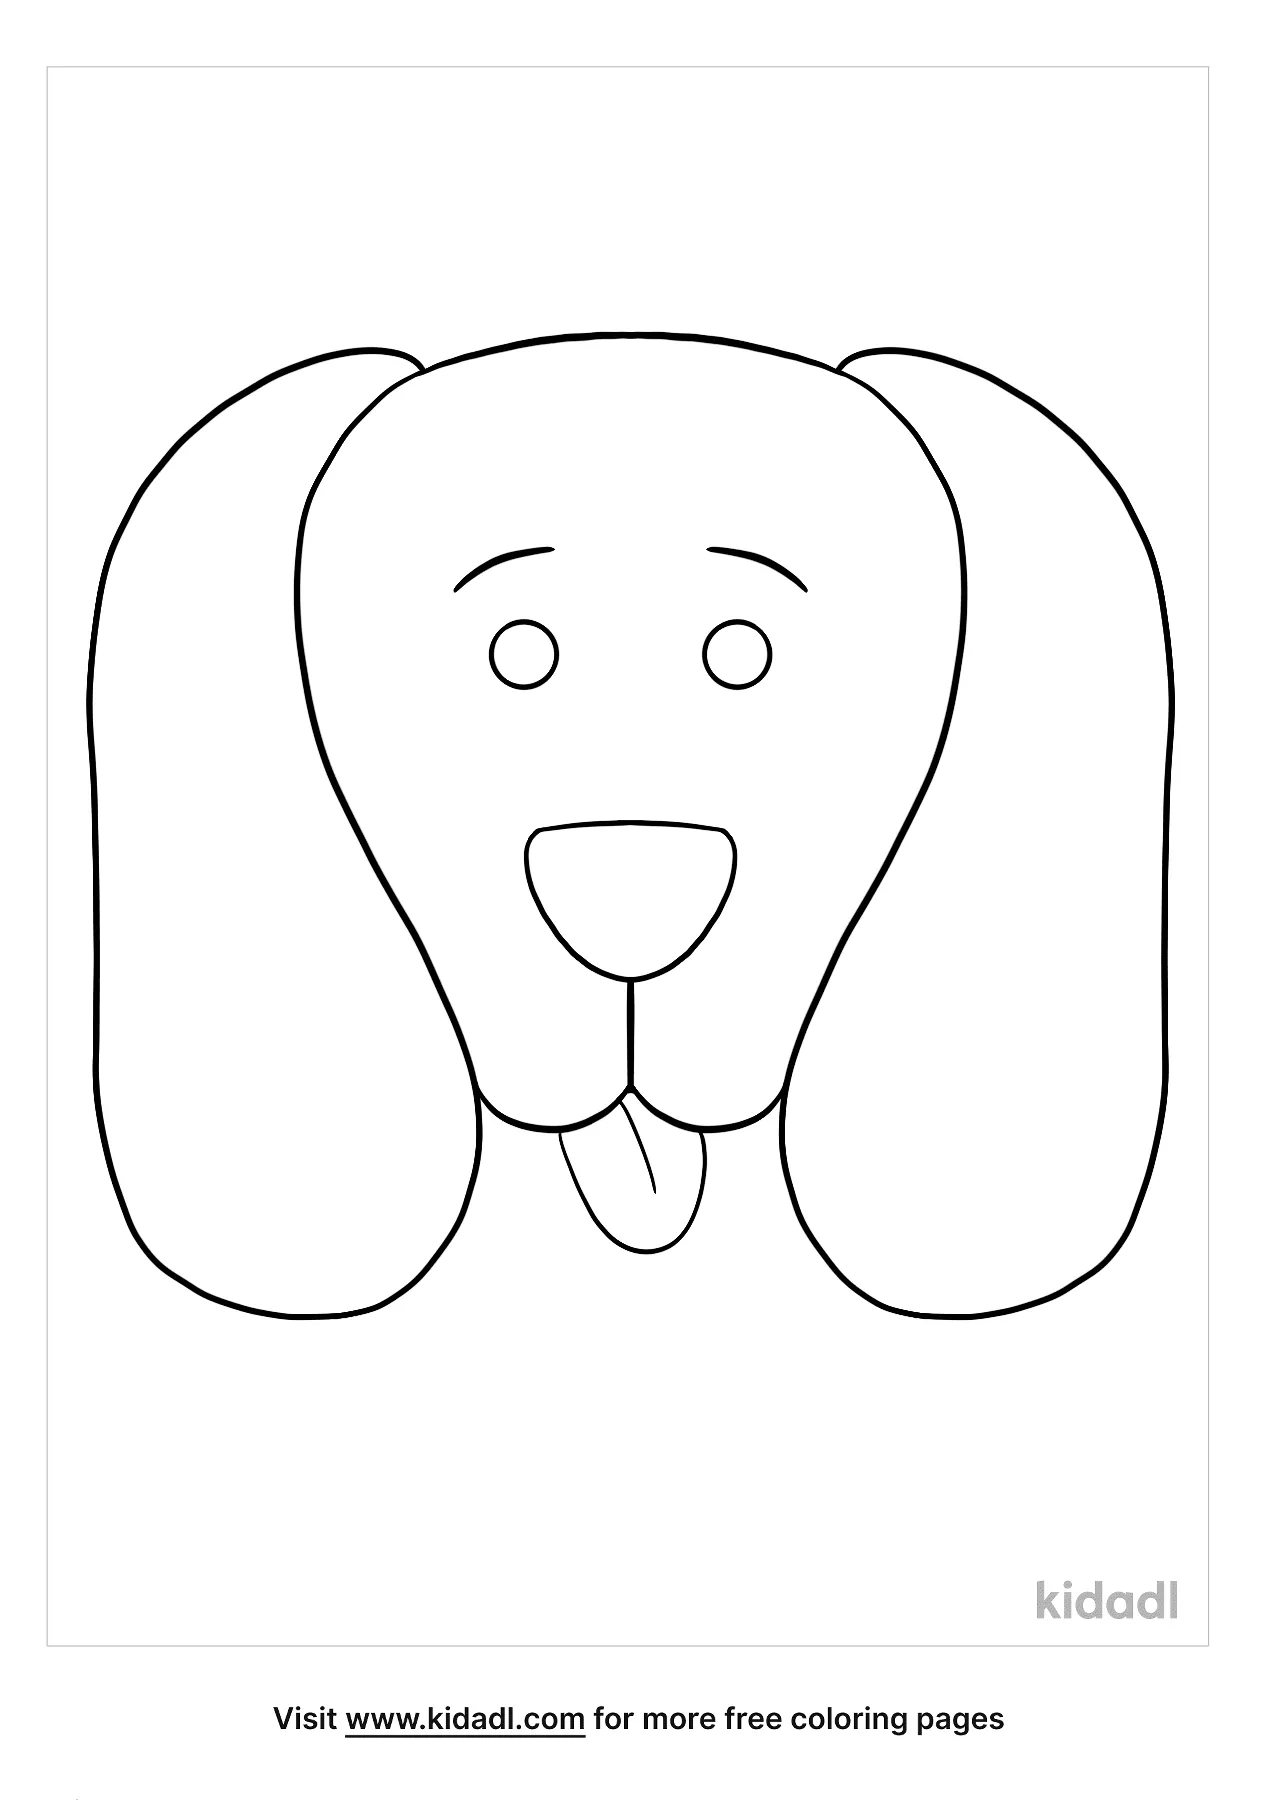 Free dog ears coloring page coloring page printables